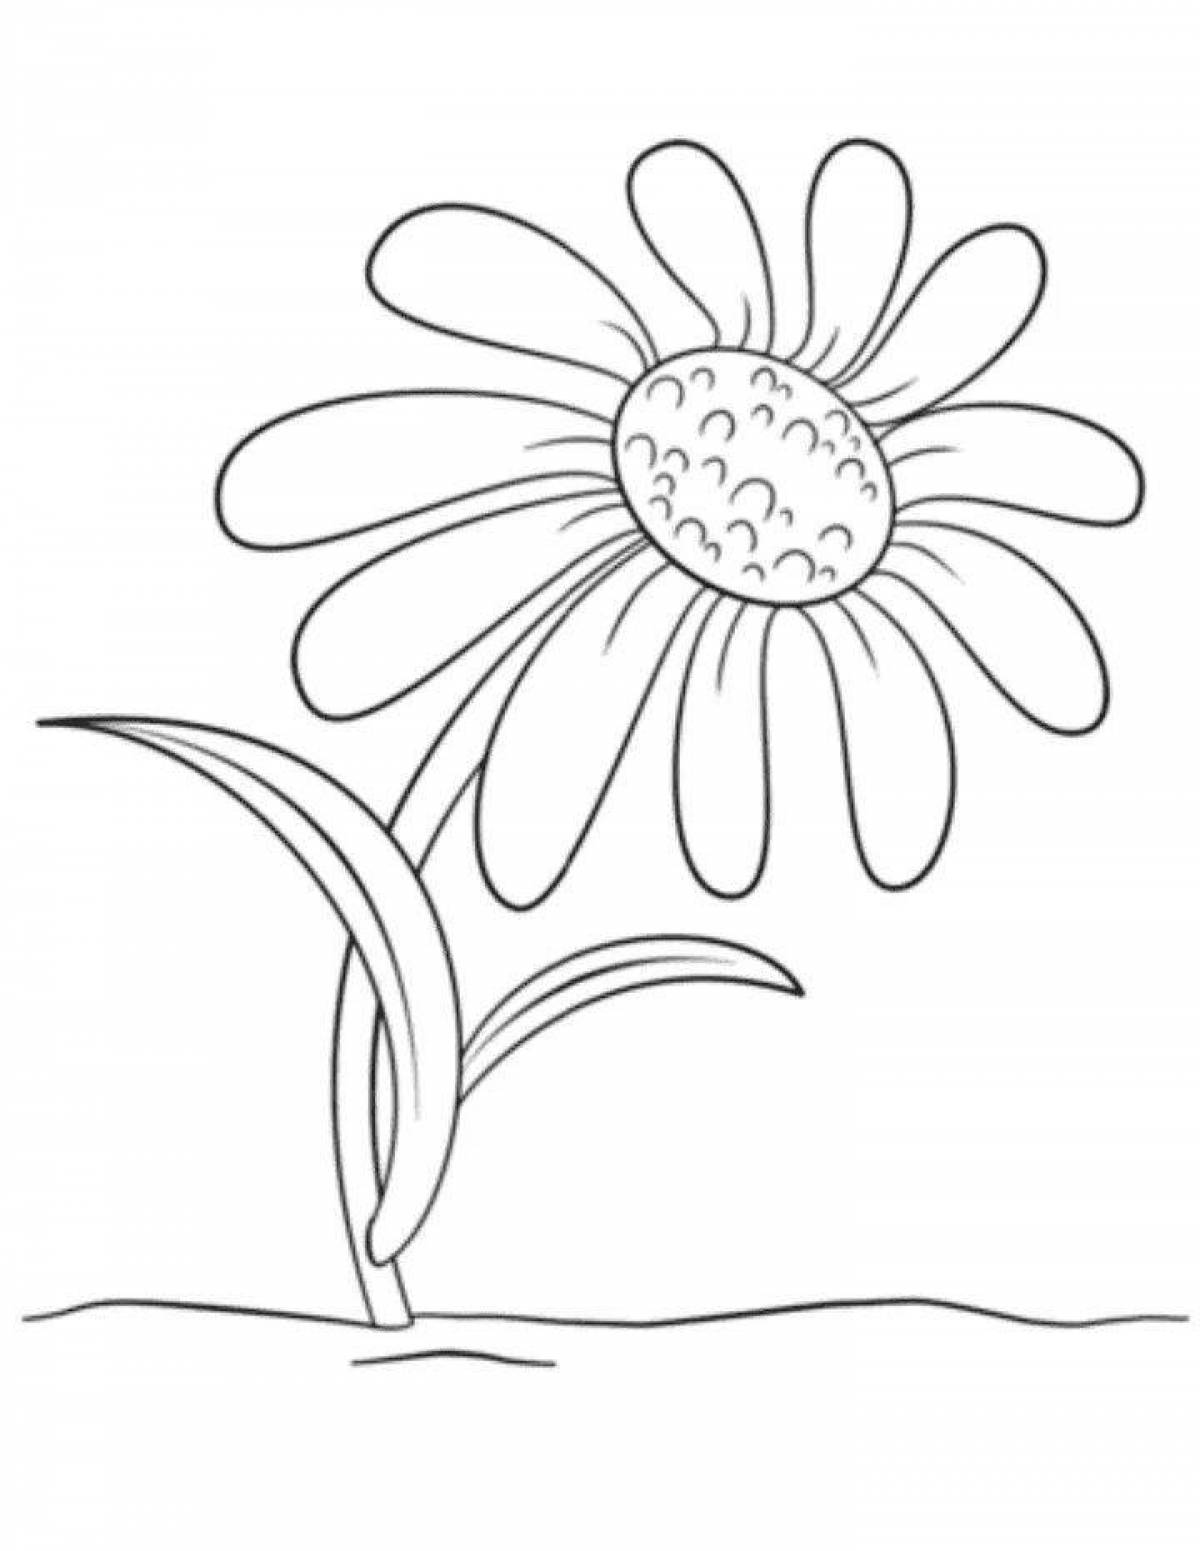 Coloring peaceful chamomile flower